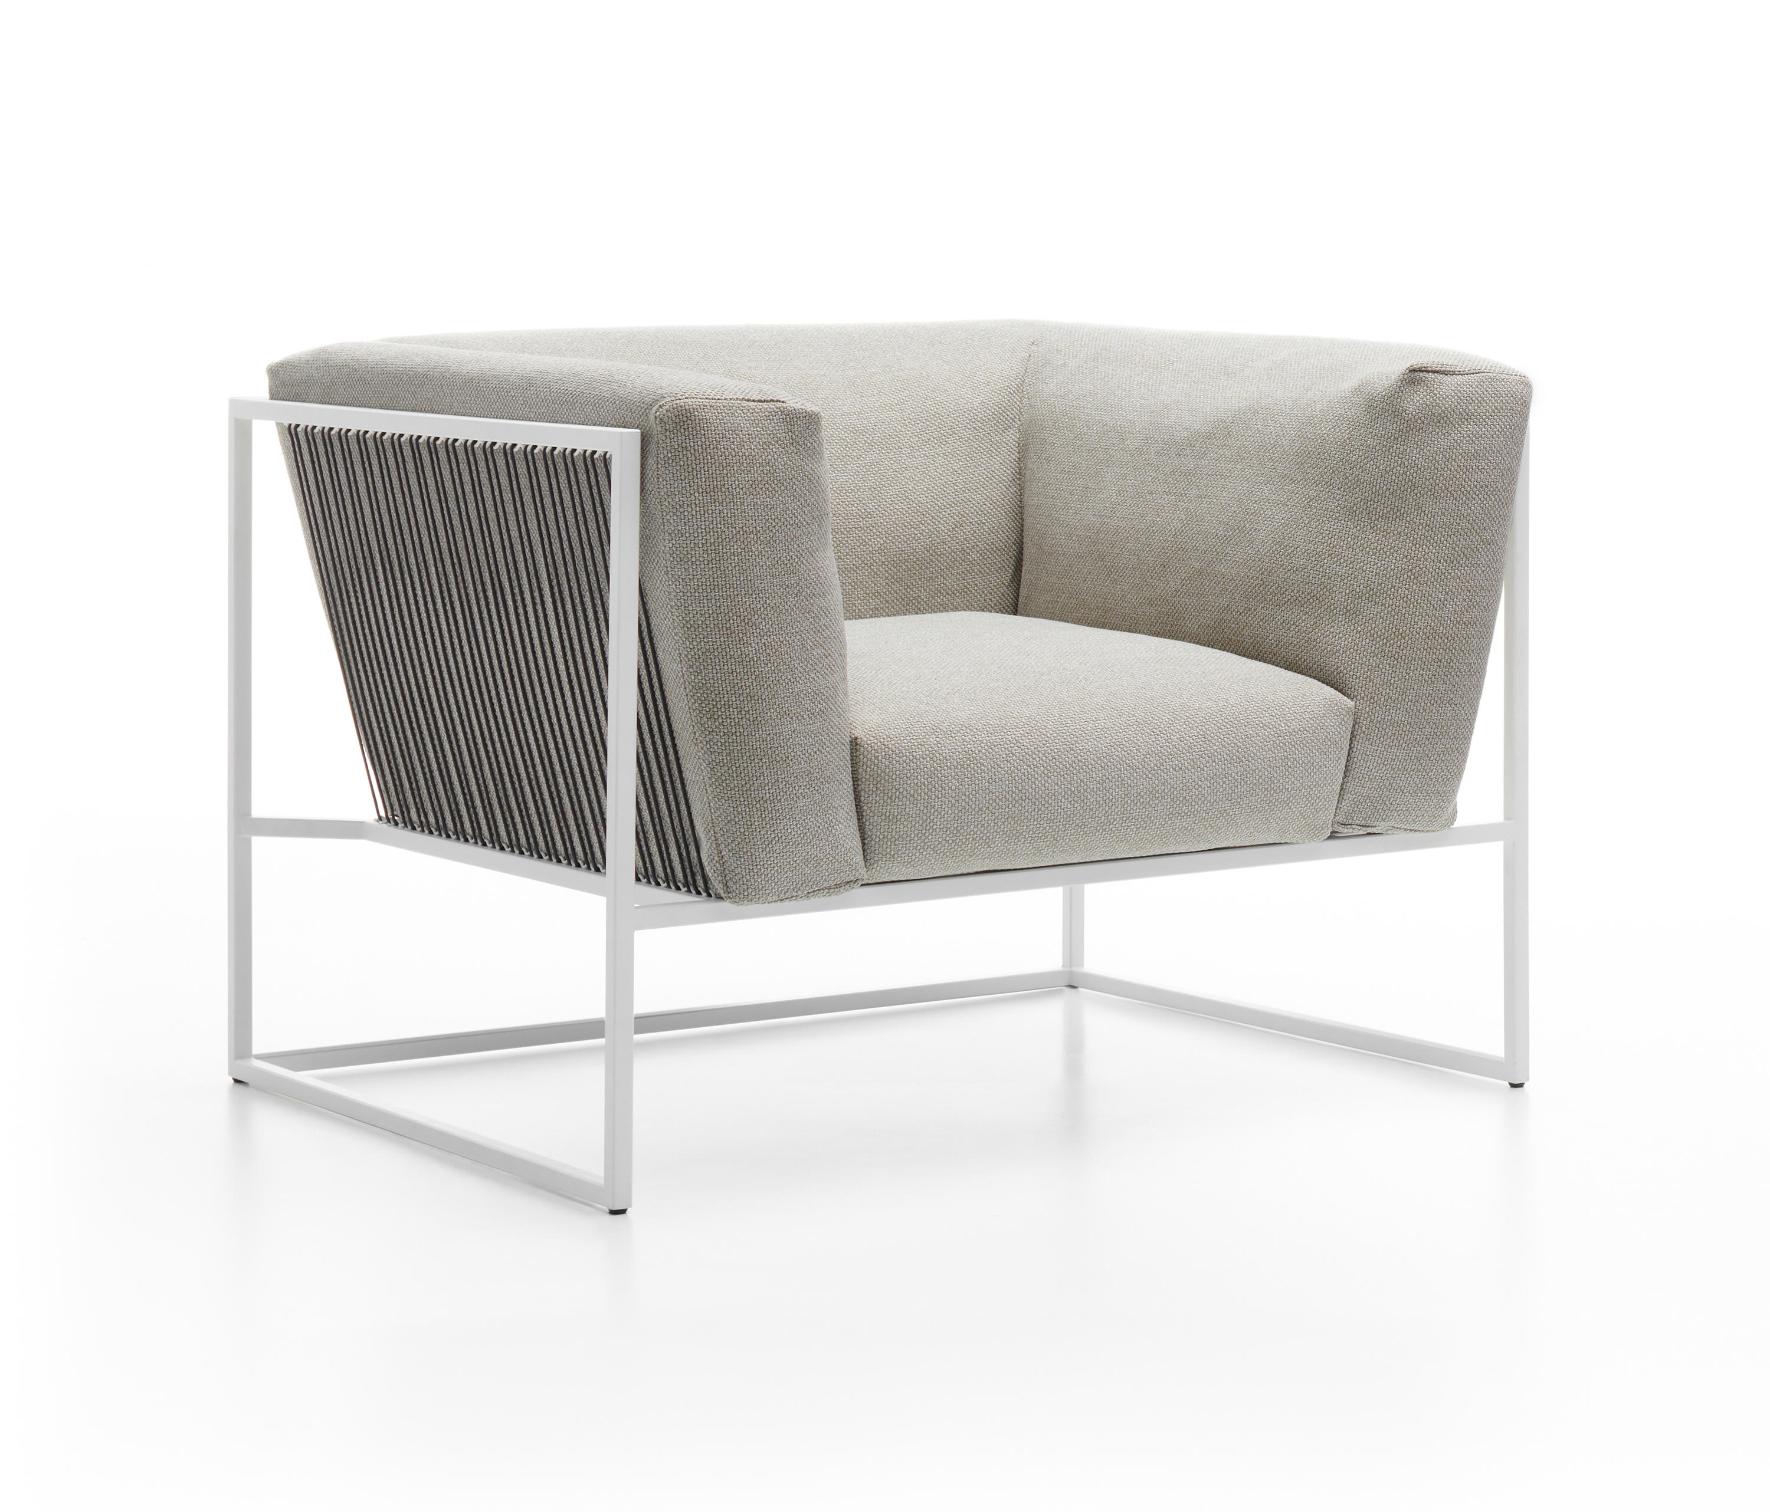 Arpa Outdoor Armchair ☞ Finishing: R659 Col.Cream